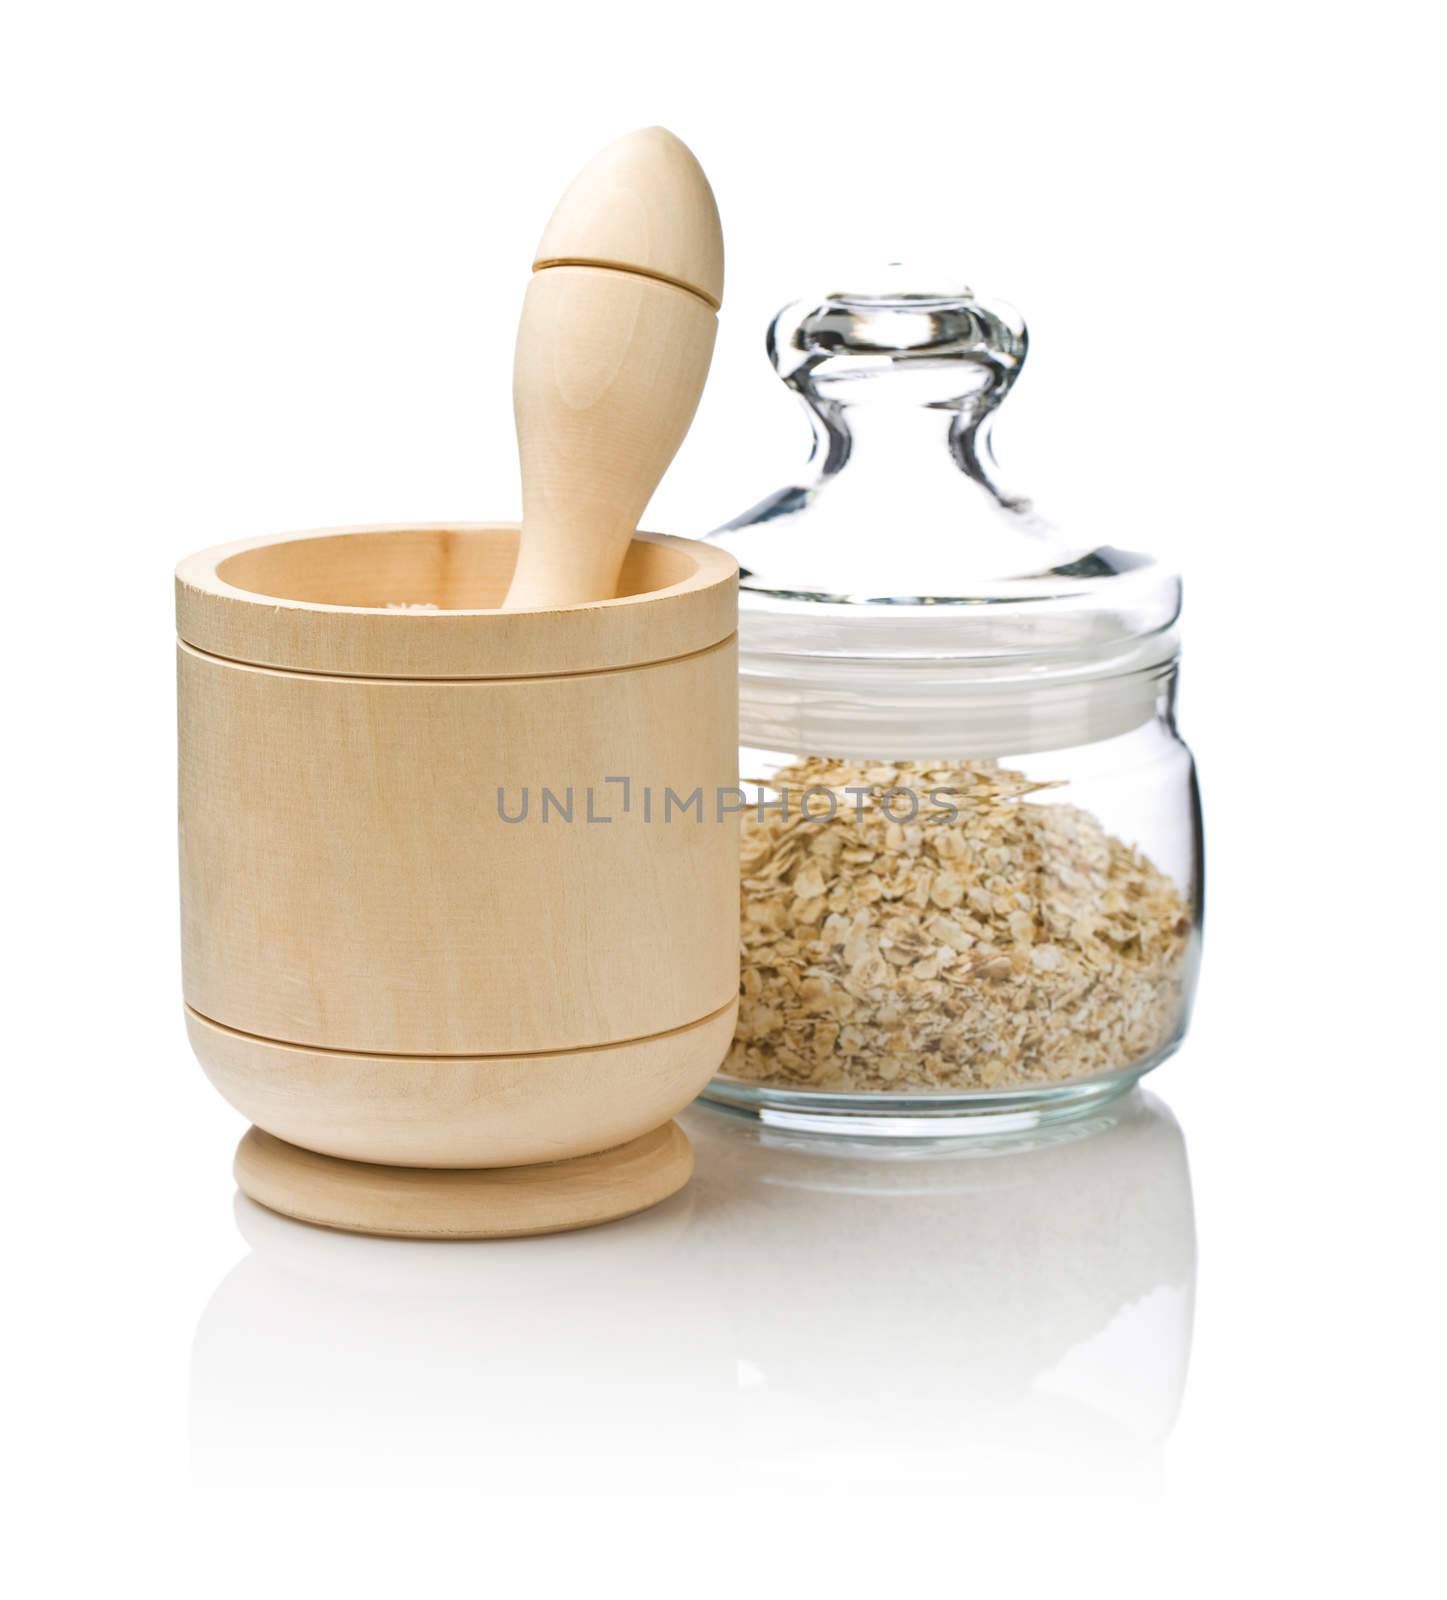 mortar with pestle and muesli